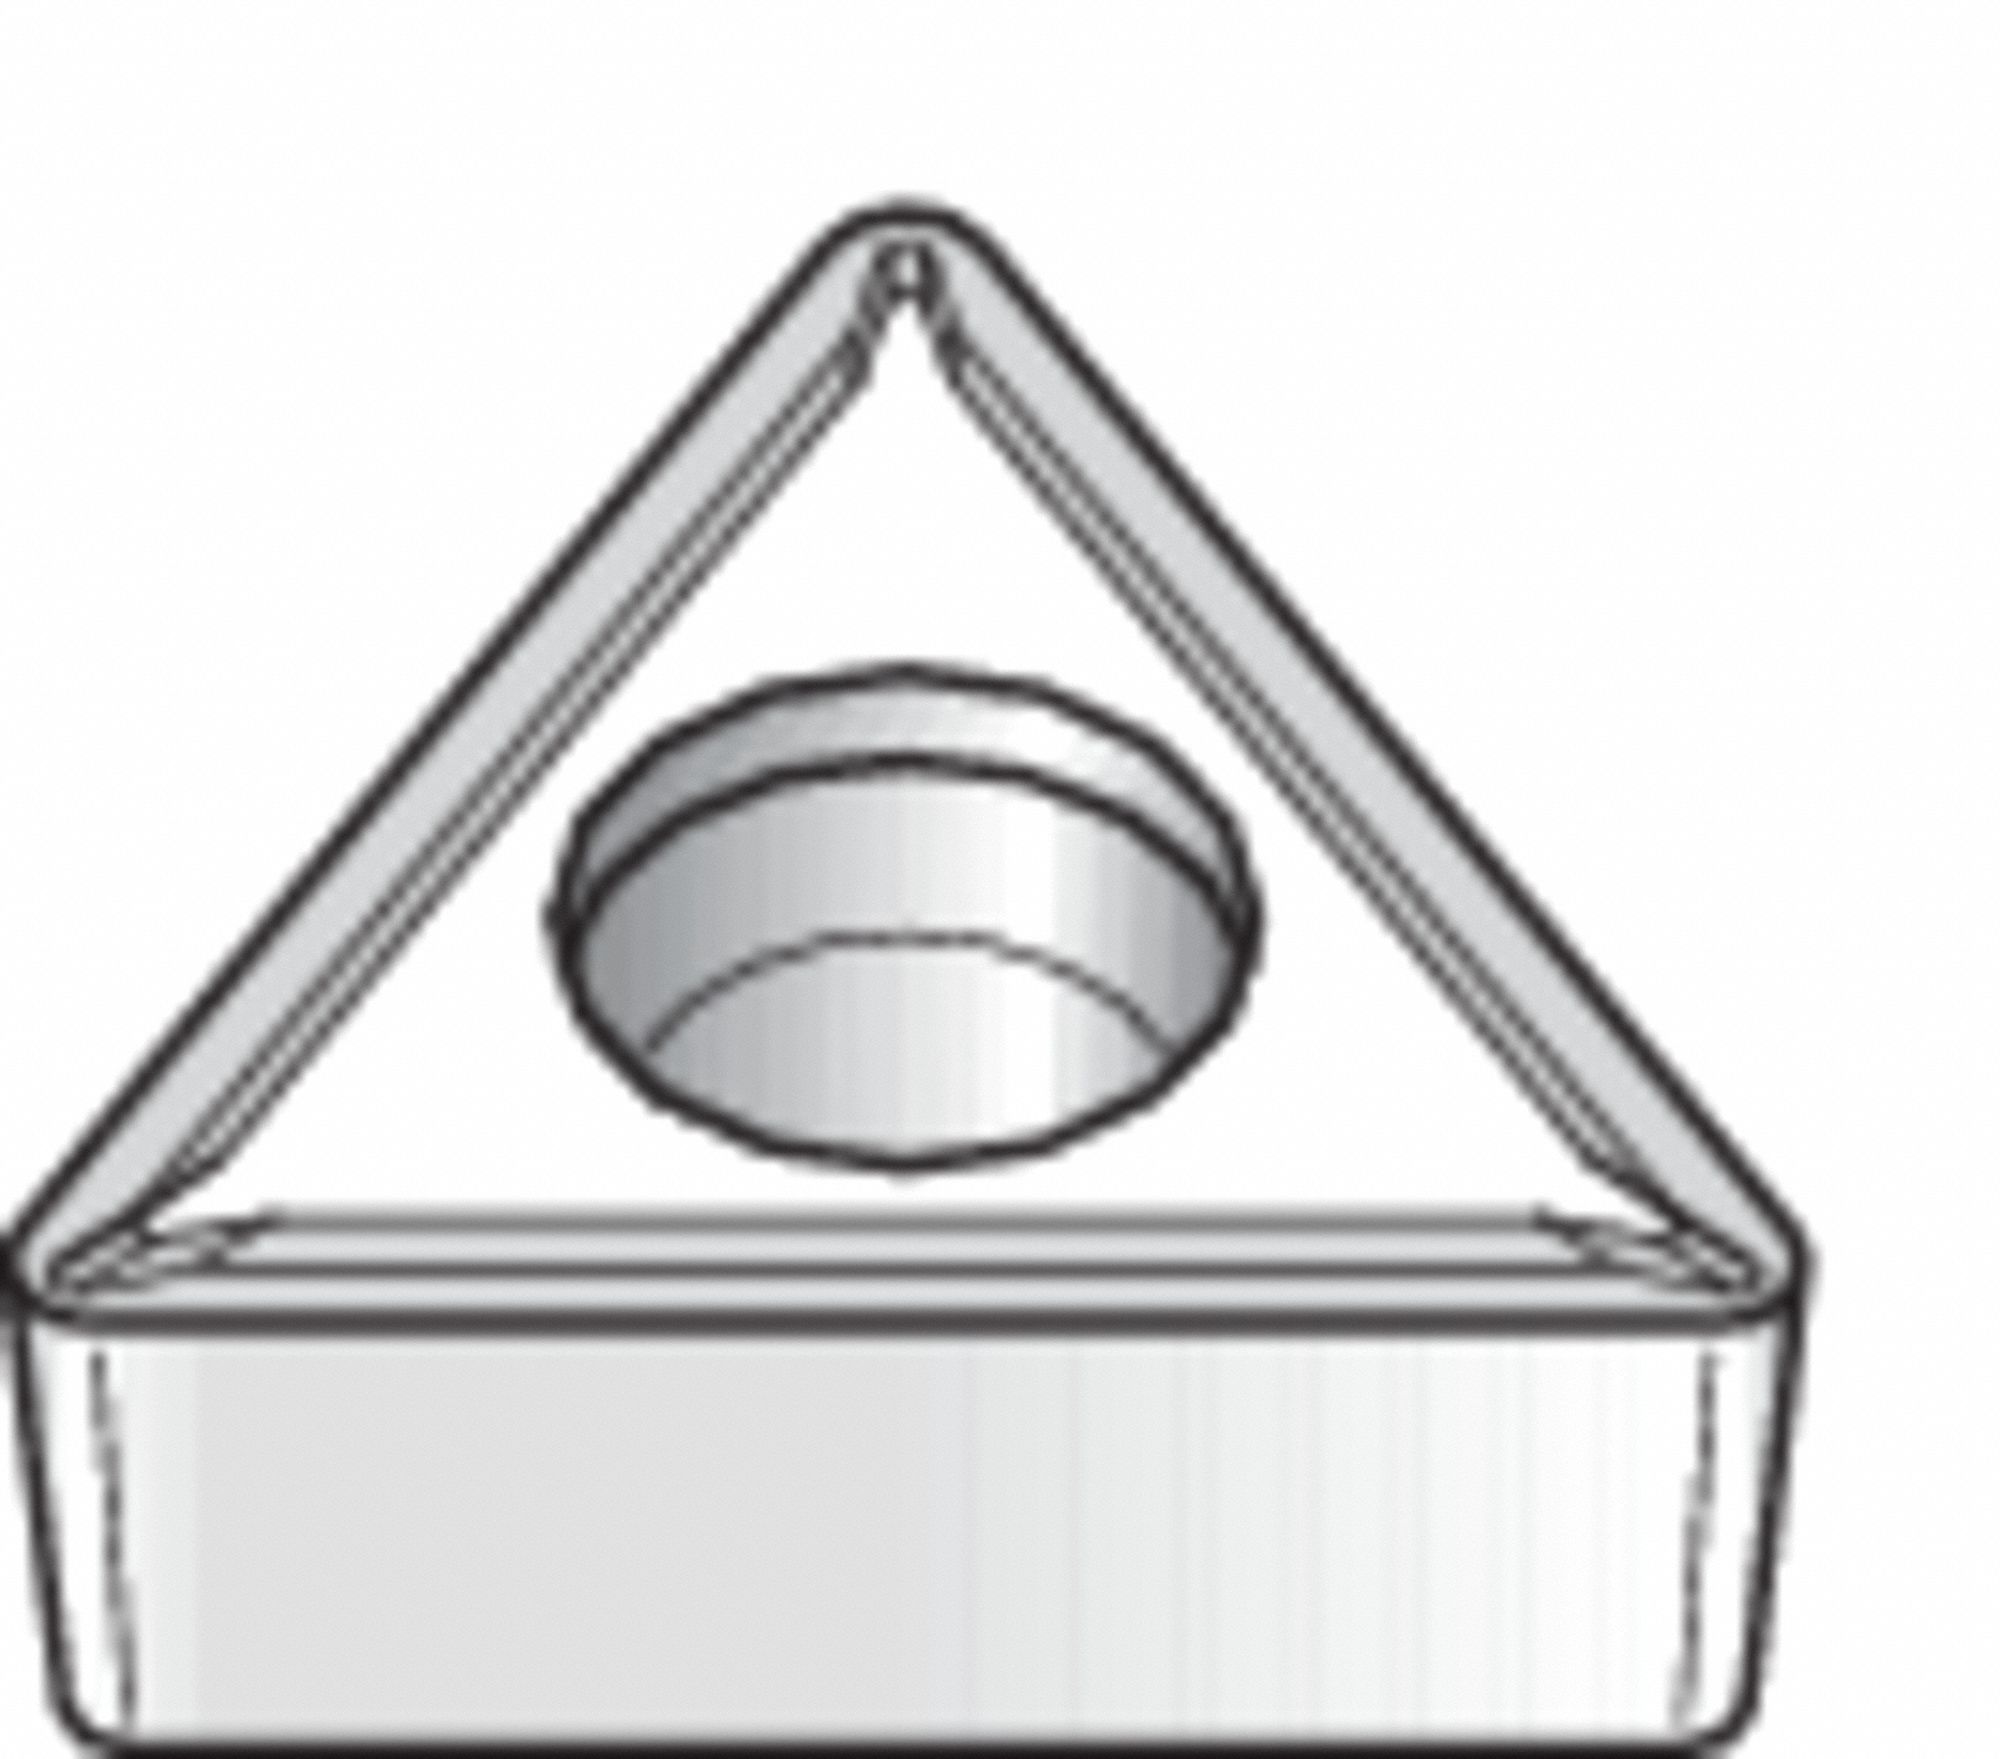 TRIANGLE TURNING INSERT, ⅜ IN INSCRIBED CIRCLE, NEUTRAL, 1P CHIP-BREAKER, 7 °  CLEARANCE